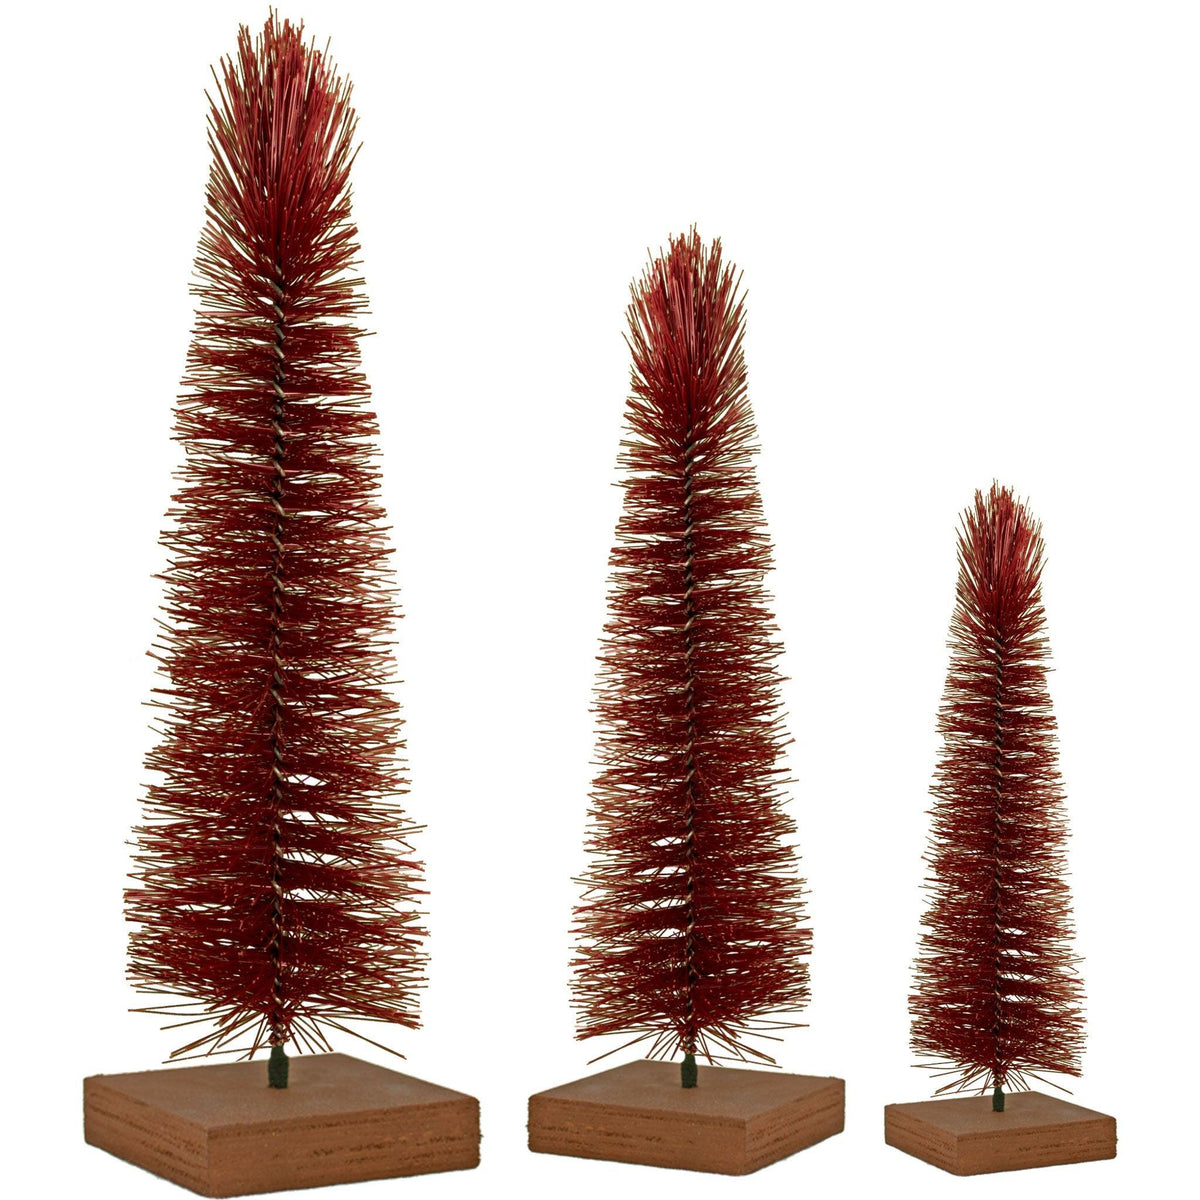 Mini Red Tabletop Bottlebrush Christmas Trees made by hand in the USA!   On sale at leedisplay.com